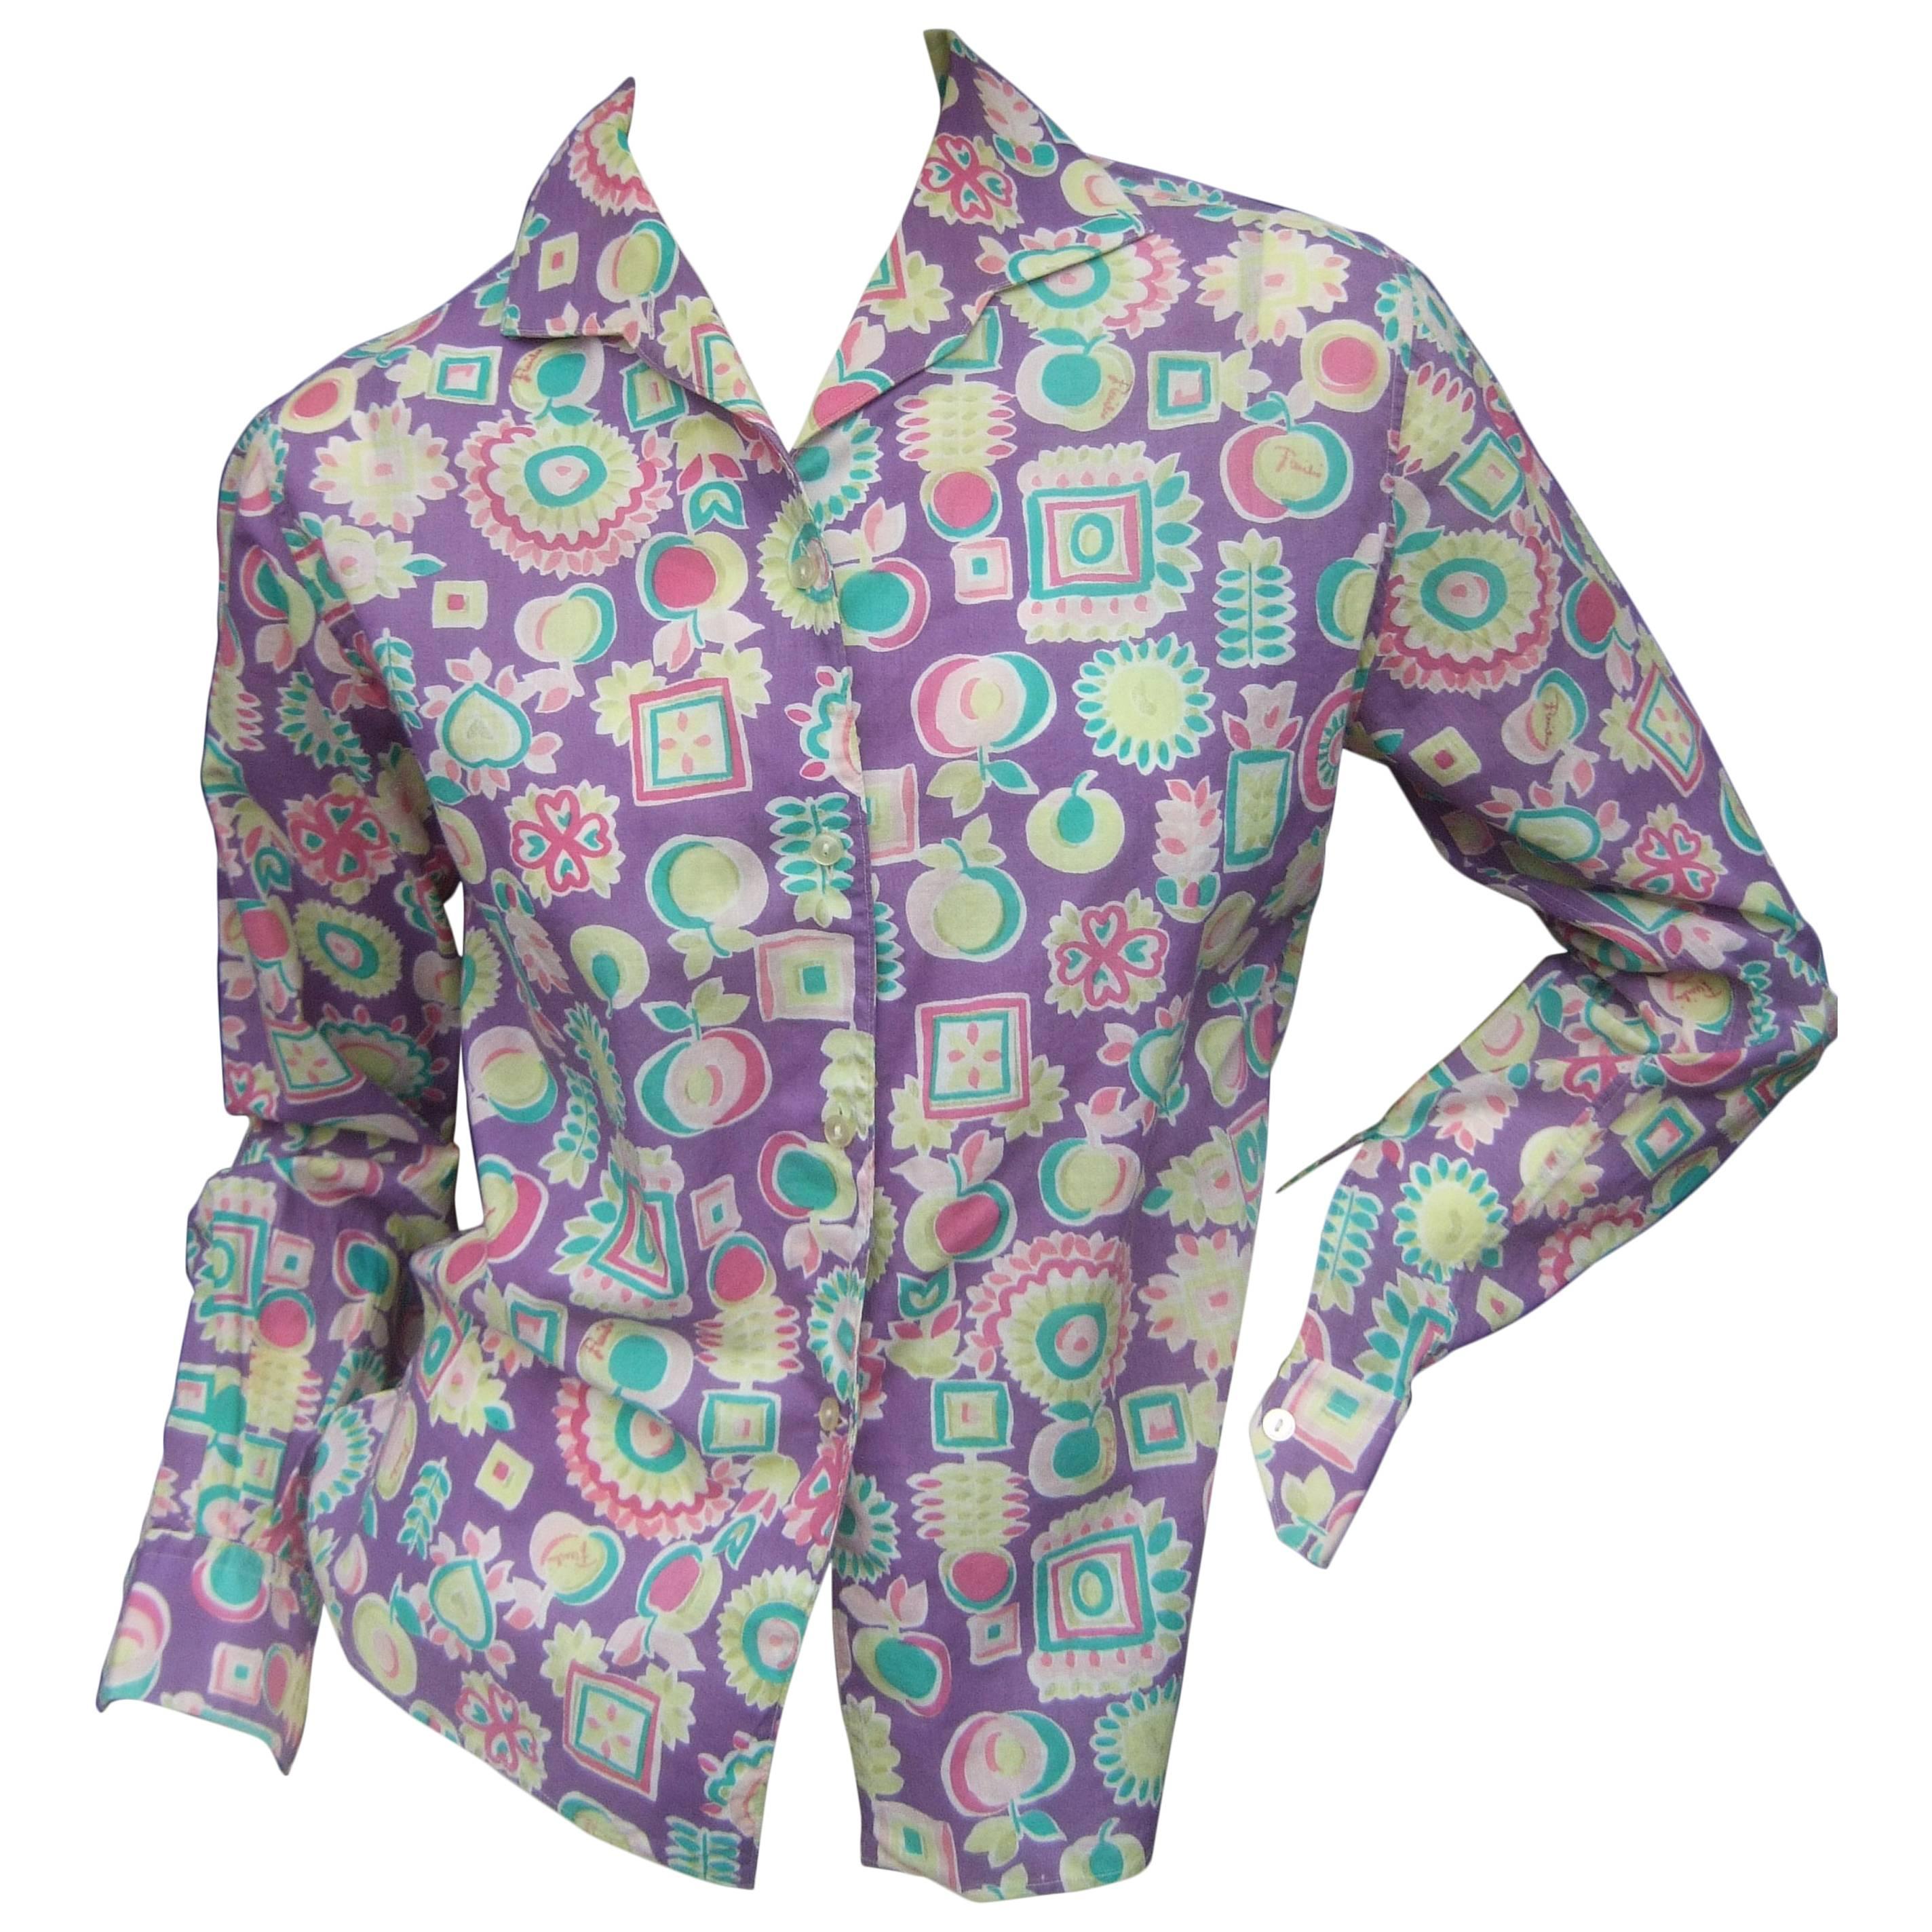 Emilio Pucci Cotton Pastel Print Blouse Made in Italy c 1970 For Sale